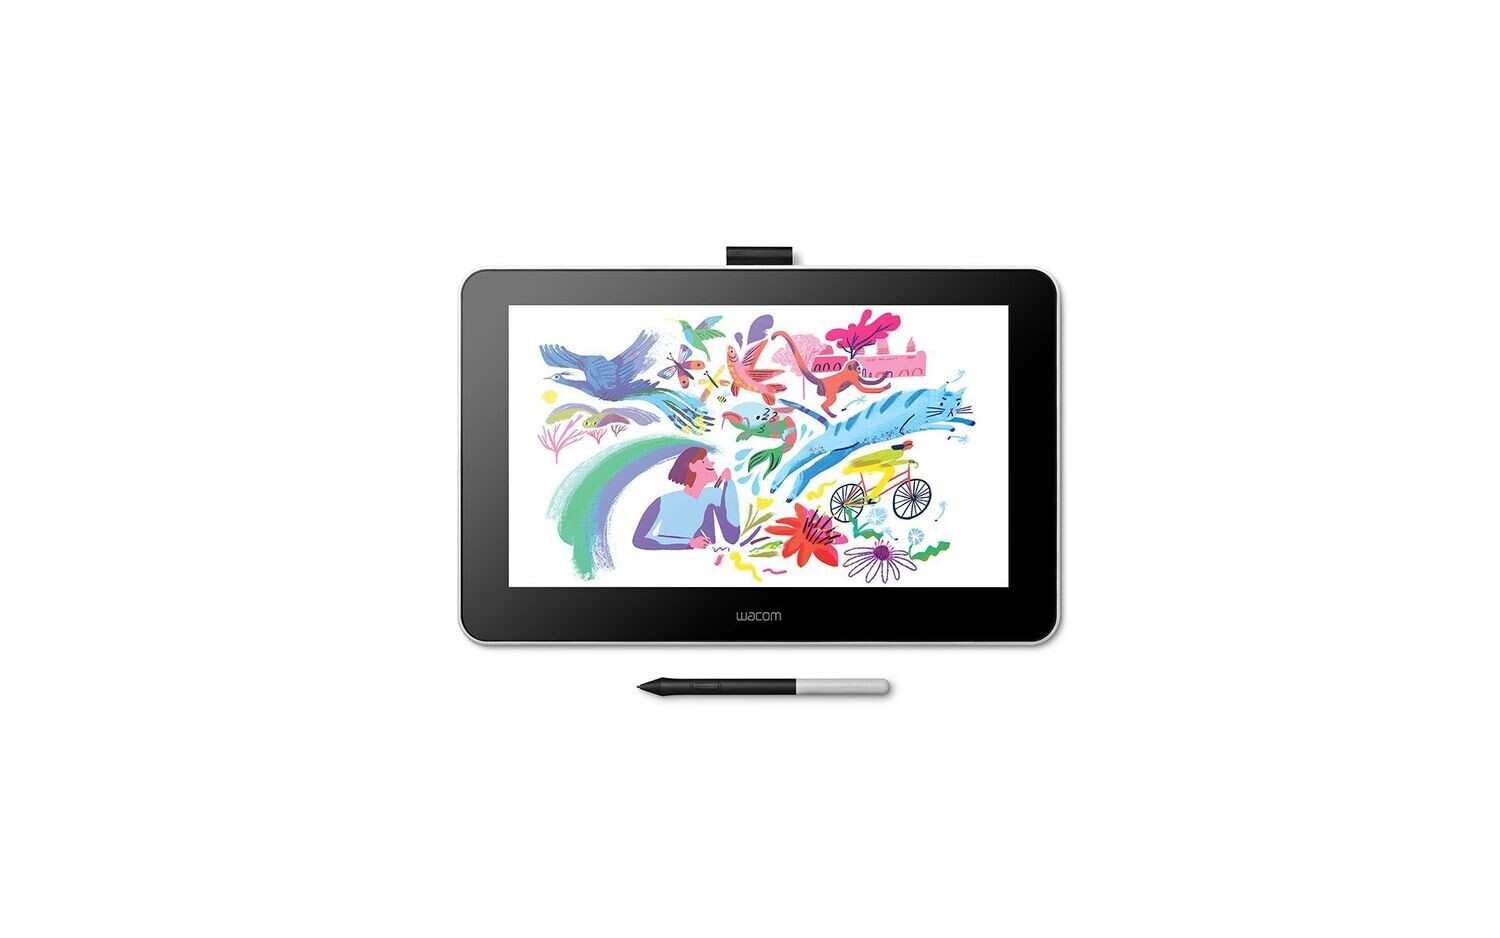 Wacom One (DTC133W0C) 13" LCD Graphic Drawing Tablet for Digital Art and Writing (Supports Windows, Mac and Android)